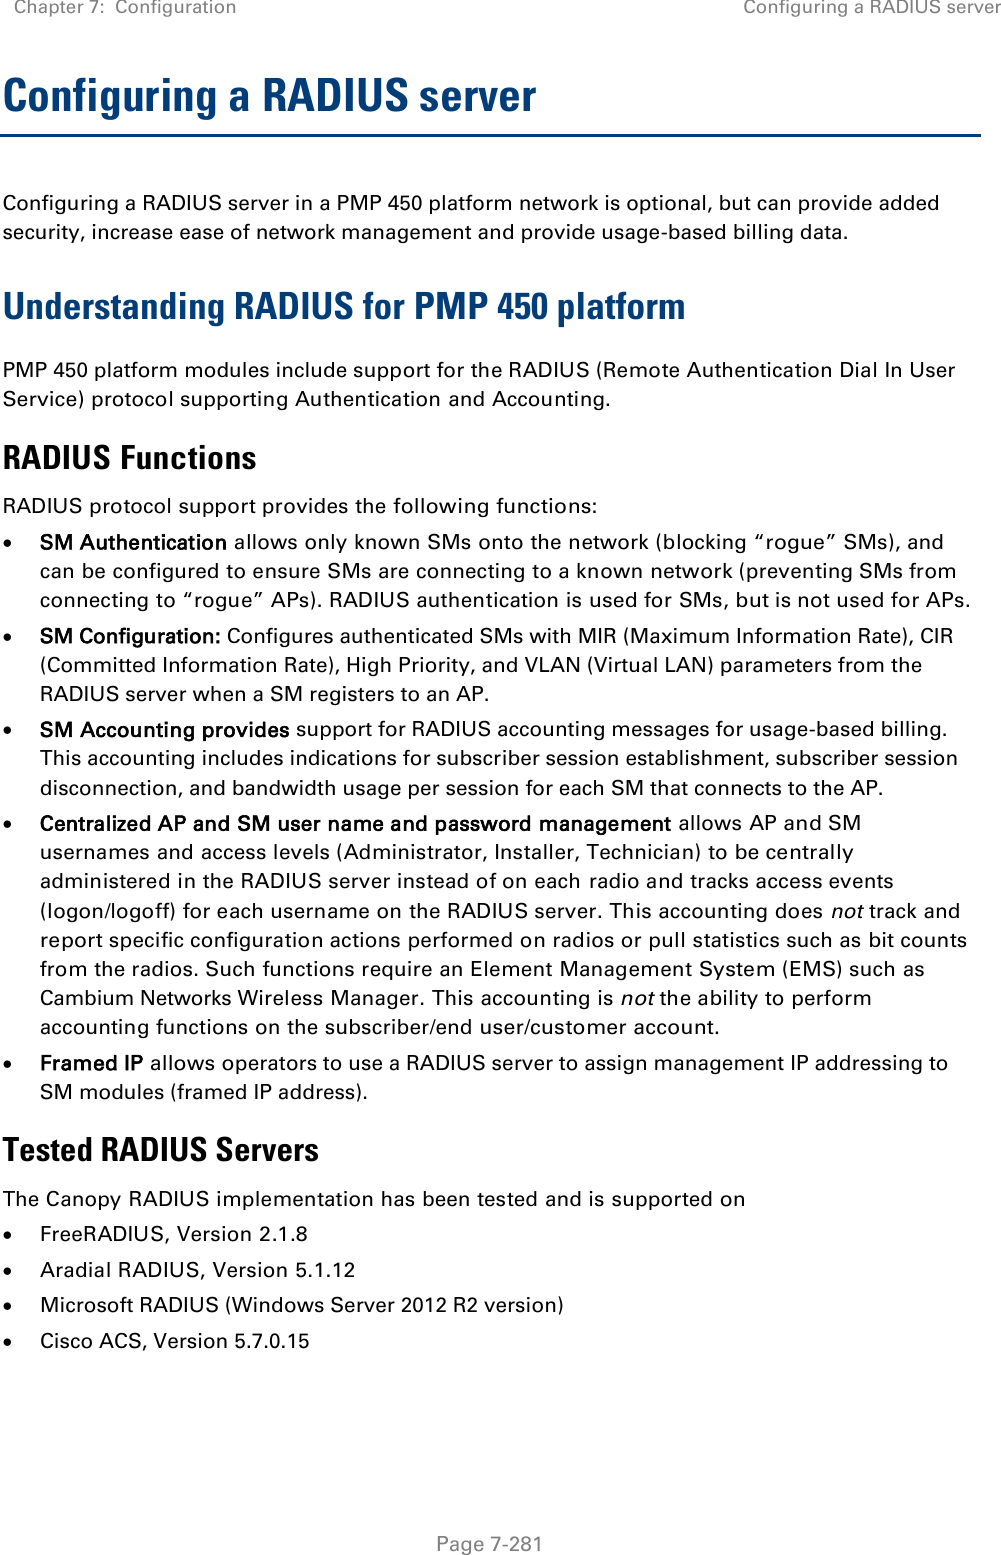 Chapter 7:  Configuration Configuring a RADIUS server   Page 7-281 Configuring a RADIUS server Configuring a RADIUS server in a PMP 450 platform network is optional, but can provide added security, increase ease of network management and provide usage-based billing data. Understanding RADIUS for PMP 450 platform PMP 450 platform modules include support for the RADIUS (Remote Authentication Dial In User Service) protocol supporting Authentication and Accounting. RADIUS Functions RADIUS protocol support provides the following functions:  SM Authentication allows only known SMs onto the network (blocking “rogue” SMs), and can be configured to ensure SMs are connecting to a known network (preventing SMs from connecting to “rogue” APs). RADIUS authentication is used for SMs, but is not used for APs.  SM Configuration: Configures authenticated SMs with MIR (Maximum Information Rate), CIR (Committed Information Rate), High Priority, and VLAN (Virtual LAN) parameters from the RADIUS server when a SM registers to an AP.  SM Accounting provides support for RADIUS accounting messages for usage-based billing. This accounting includes indications for subscriber session establishment, subscriber session disconnection, and bandwidth usage per session for each SM that connects to the AP.   Centralized AP and SM user name and password management allows AP and SM usernames and access levels (Administrator, Installer, Technician) to be centrally administered in the RADIUS server instead of on each radio and tracks access events (logon/logoff) for each username on the RADIUS server. This accounting does not track and report specific configuration actions performed on radios or pull statistics such as bit counts from the radios. Such functions require an Element Management System (EMS) such as Cambium Networks Wireless Manager. This accounting is not the ability to perform accounting functions on the subscriber/end user/customer account.  Framed IP allows operators to use a RADIUS server to assign management IP addressing to SM modules (framed IP address). Tested RADIUS Servers The Canopy RADIUS implementation has been tested and is supported on  FreeRADIUS, Version 2.1.8  Aradial RADIUS, Version 5.1.12  Microsoft RADIUS (Windows Server 2012 R2 version)   Cisco ACS, Version 5.7.0.15  